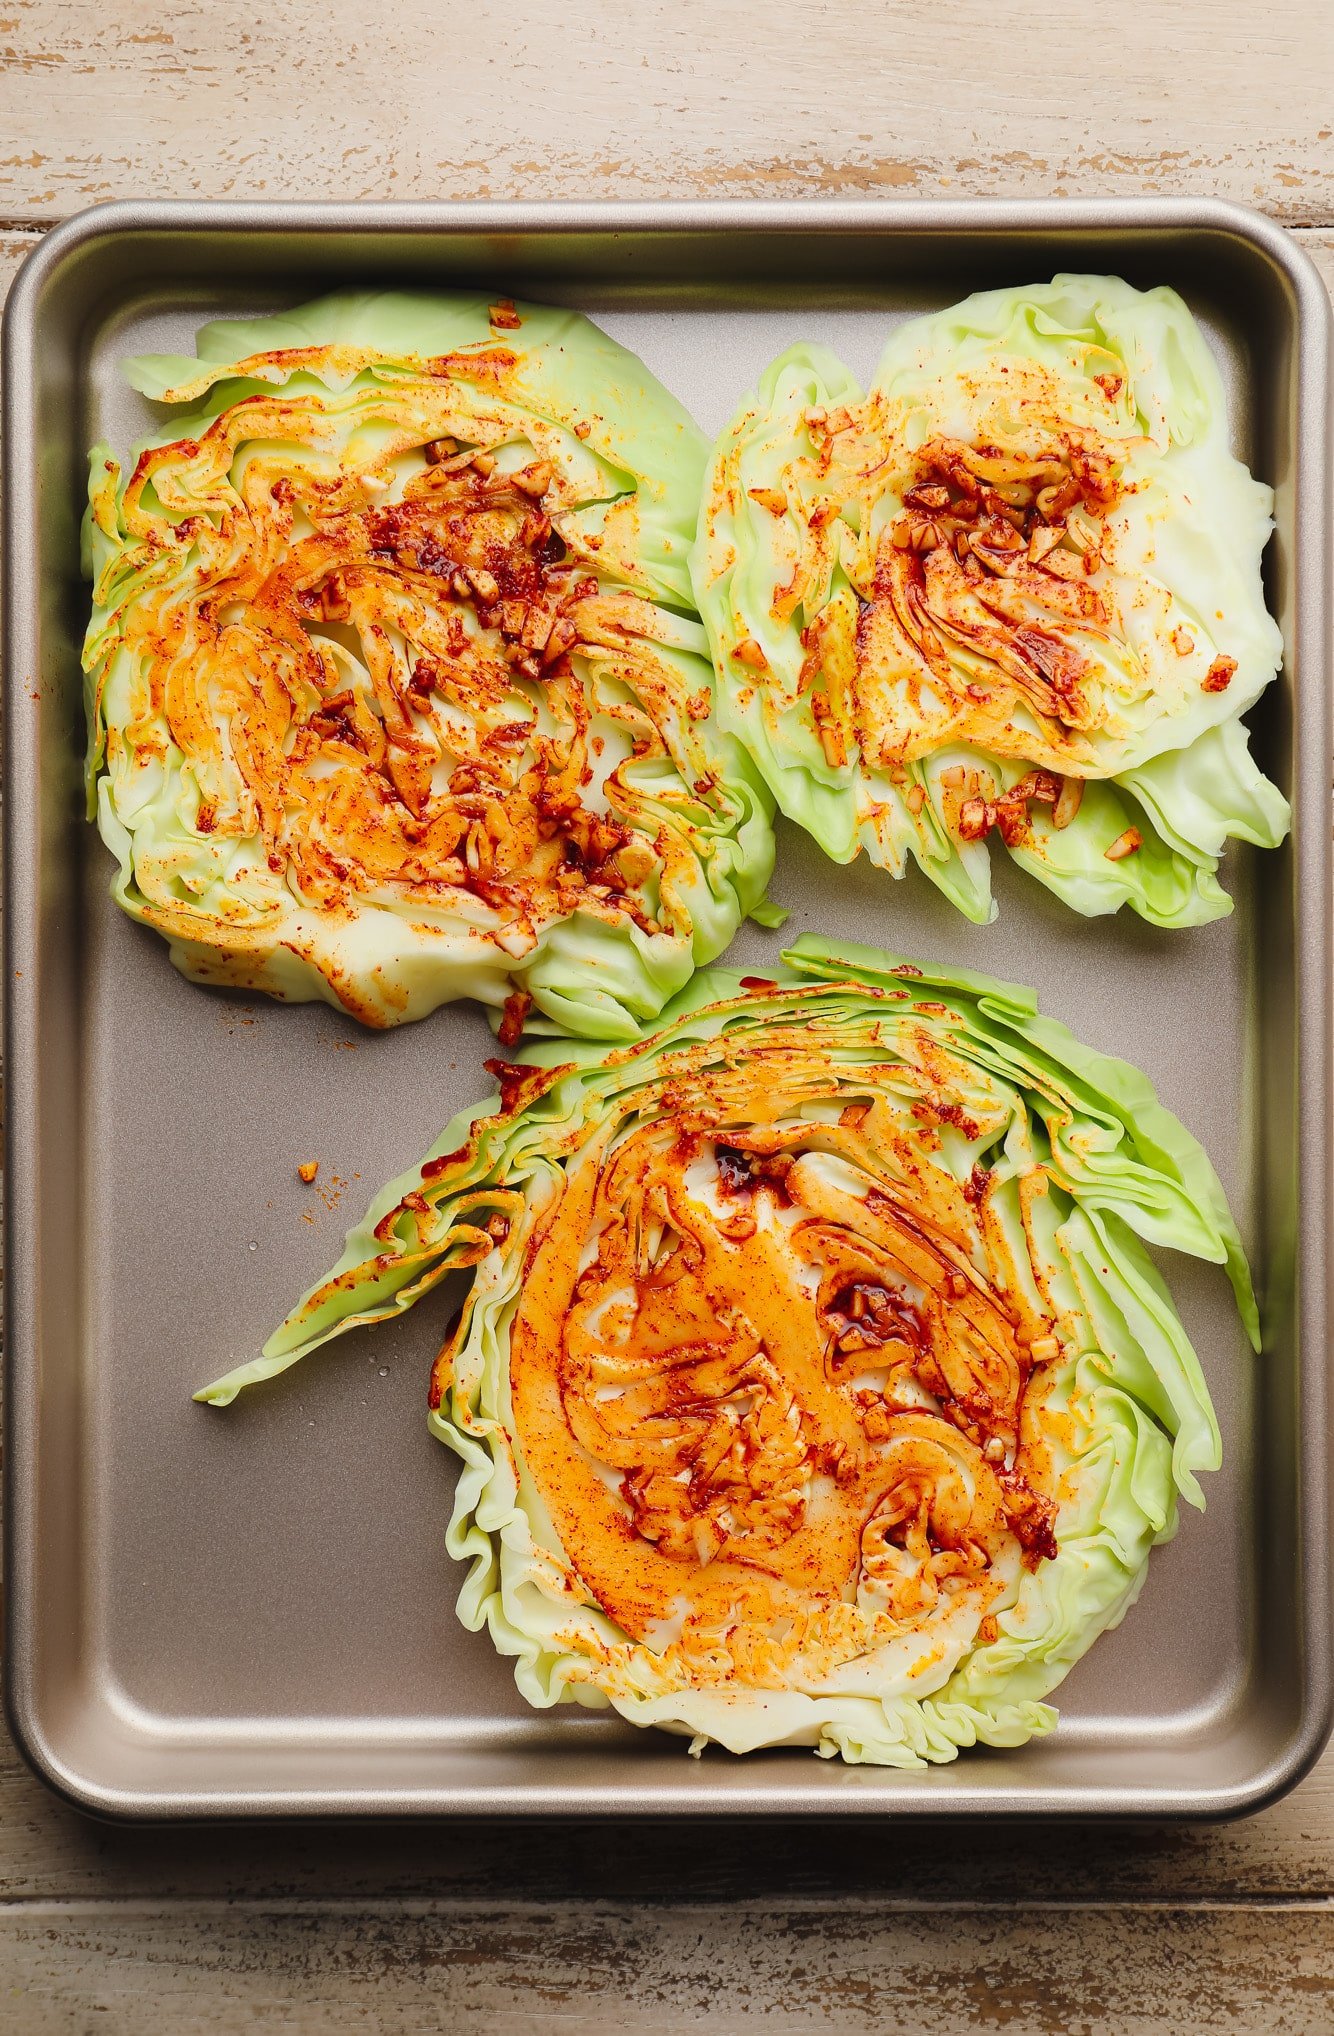 cabbage steaks brushed with oil and seasonings on a metal baking sheet.